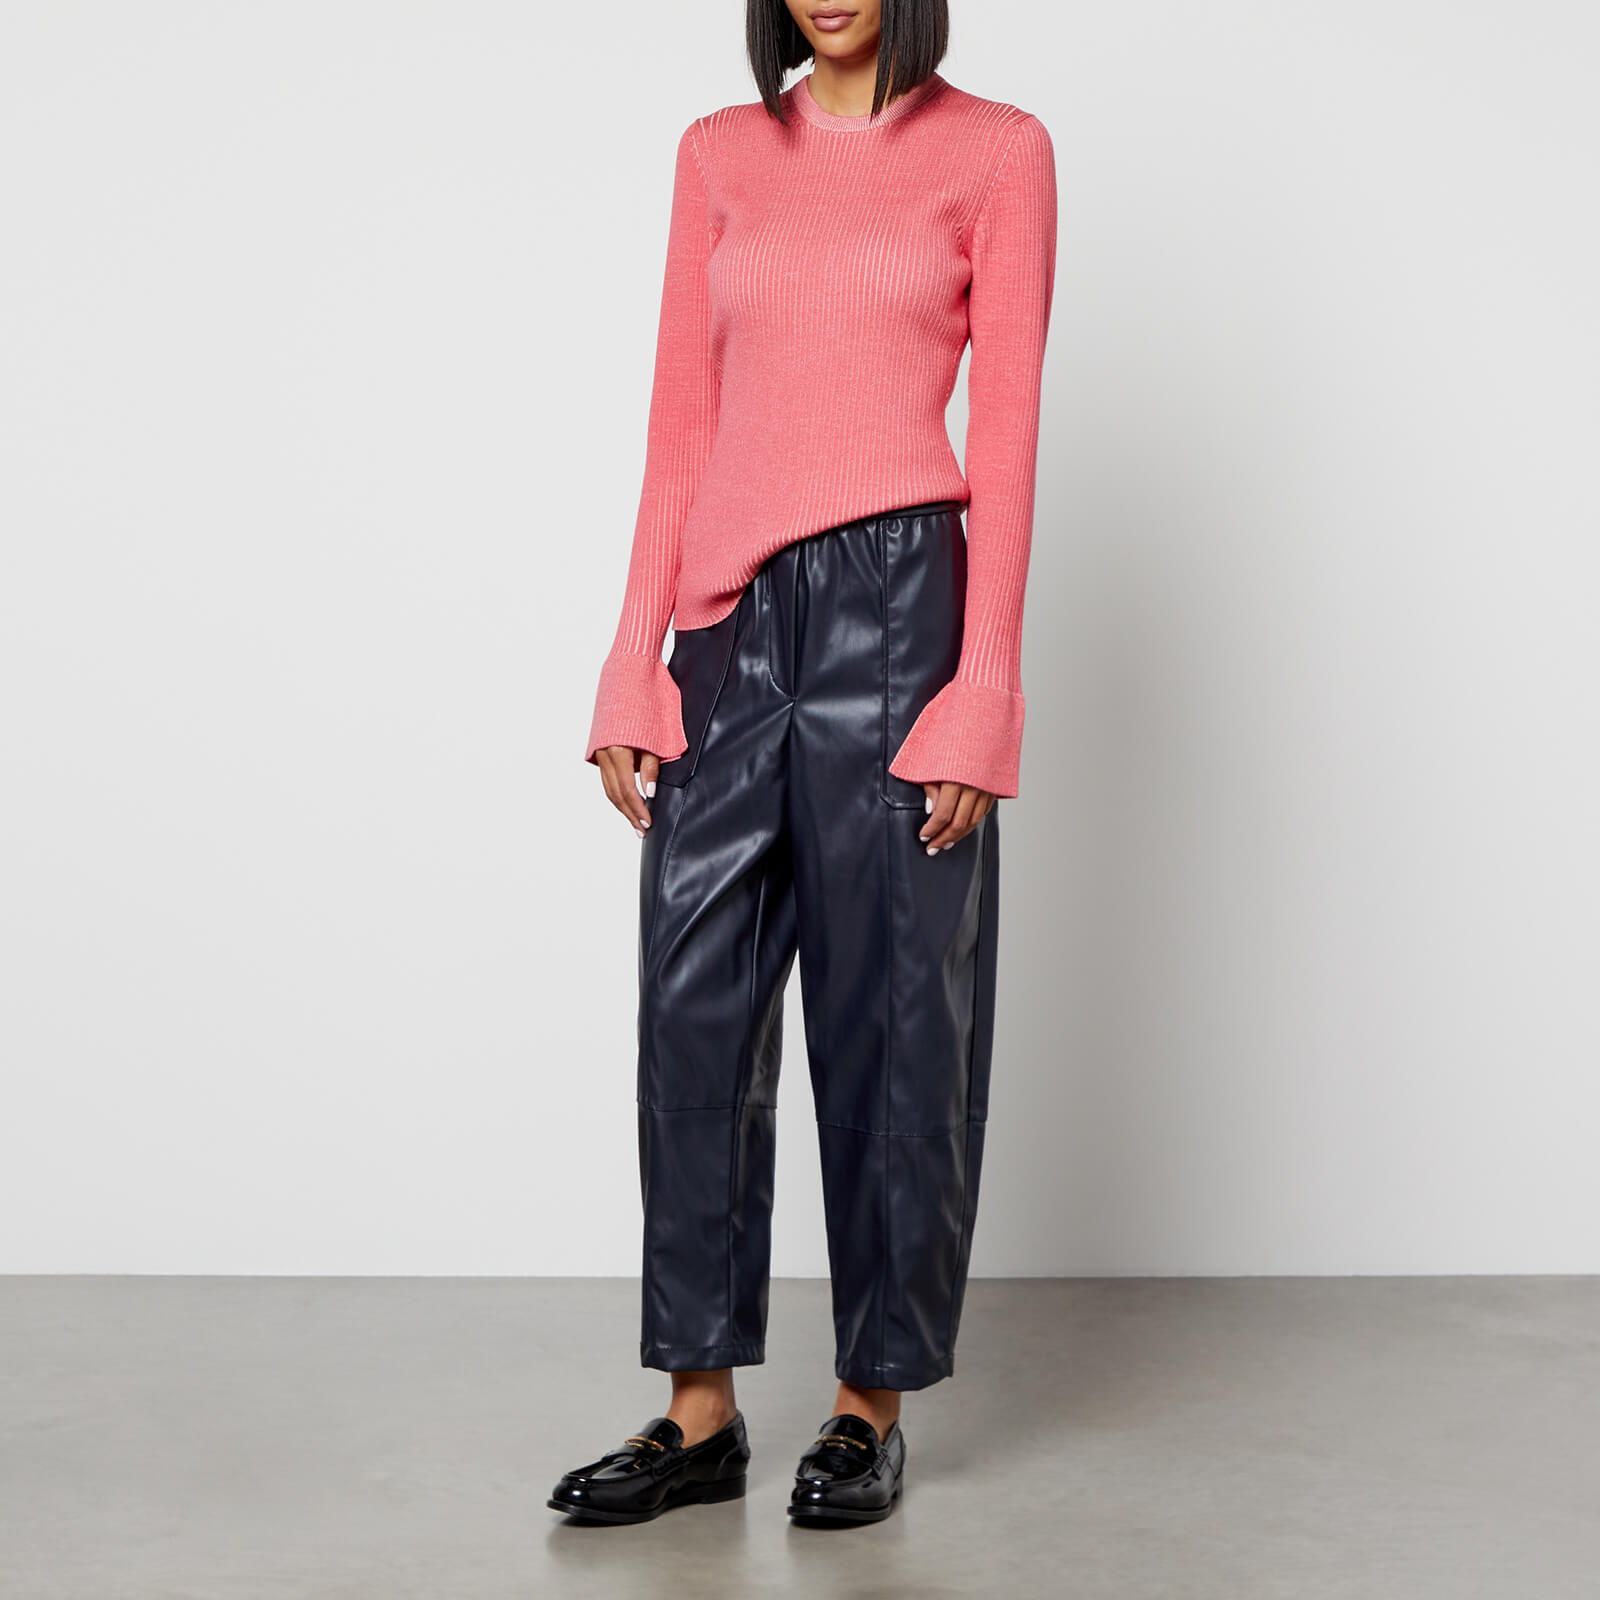 3.1 Phillip Lim Ribbed Wool Jumper - L F221 7694bclra605 General Clothing, Pink